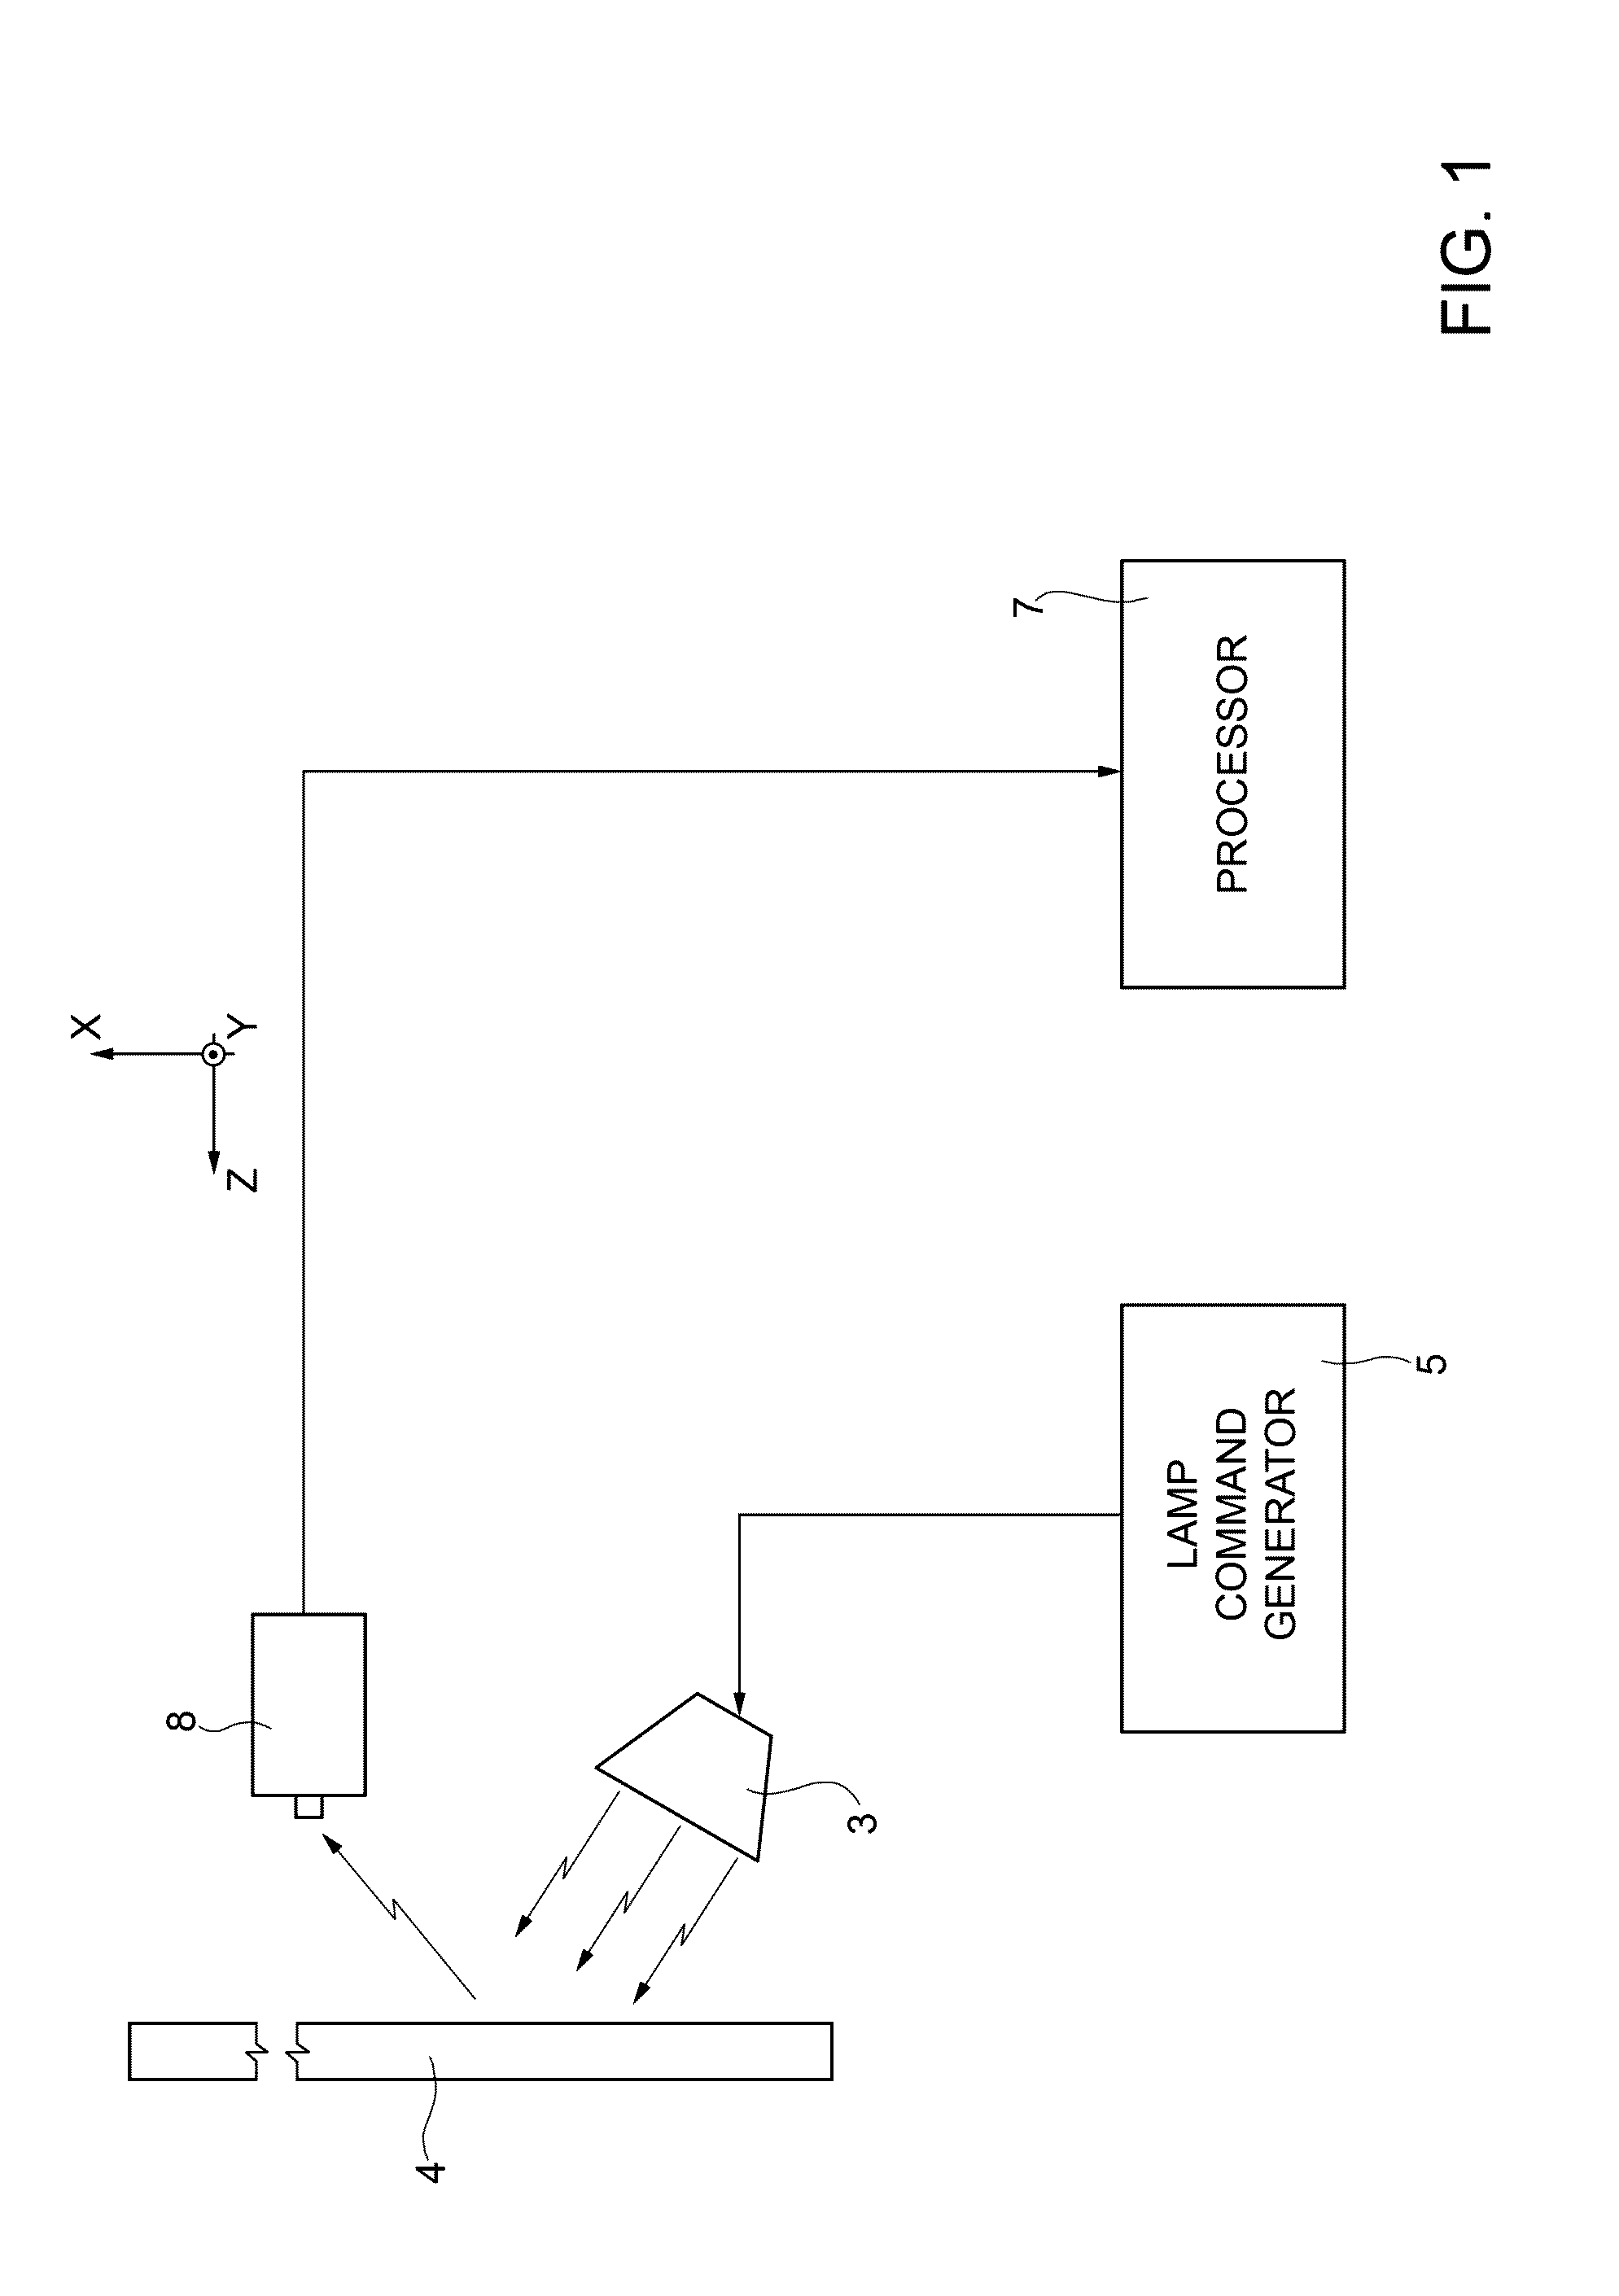 Method and system of thermographic non-destructive inspection for detecting and measuring volumetric defects in composite material structures